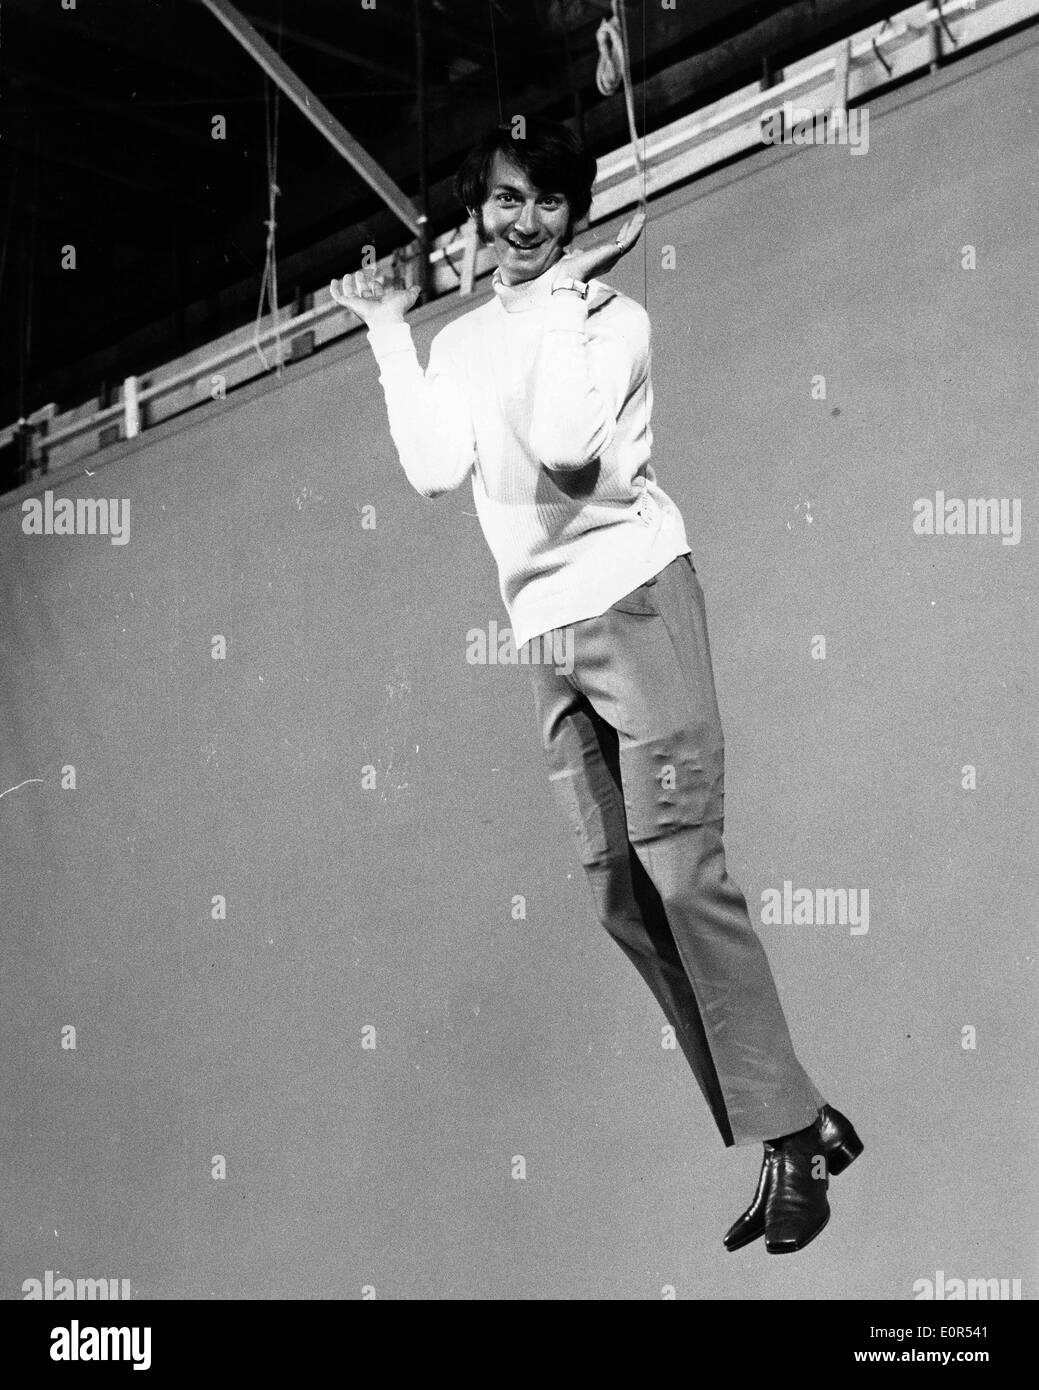 Singer Mike Nesmith swinging in a scene from a new Monkees' film Stock Photo